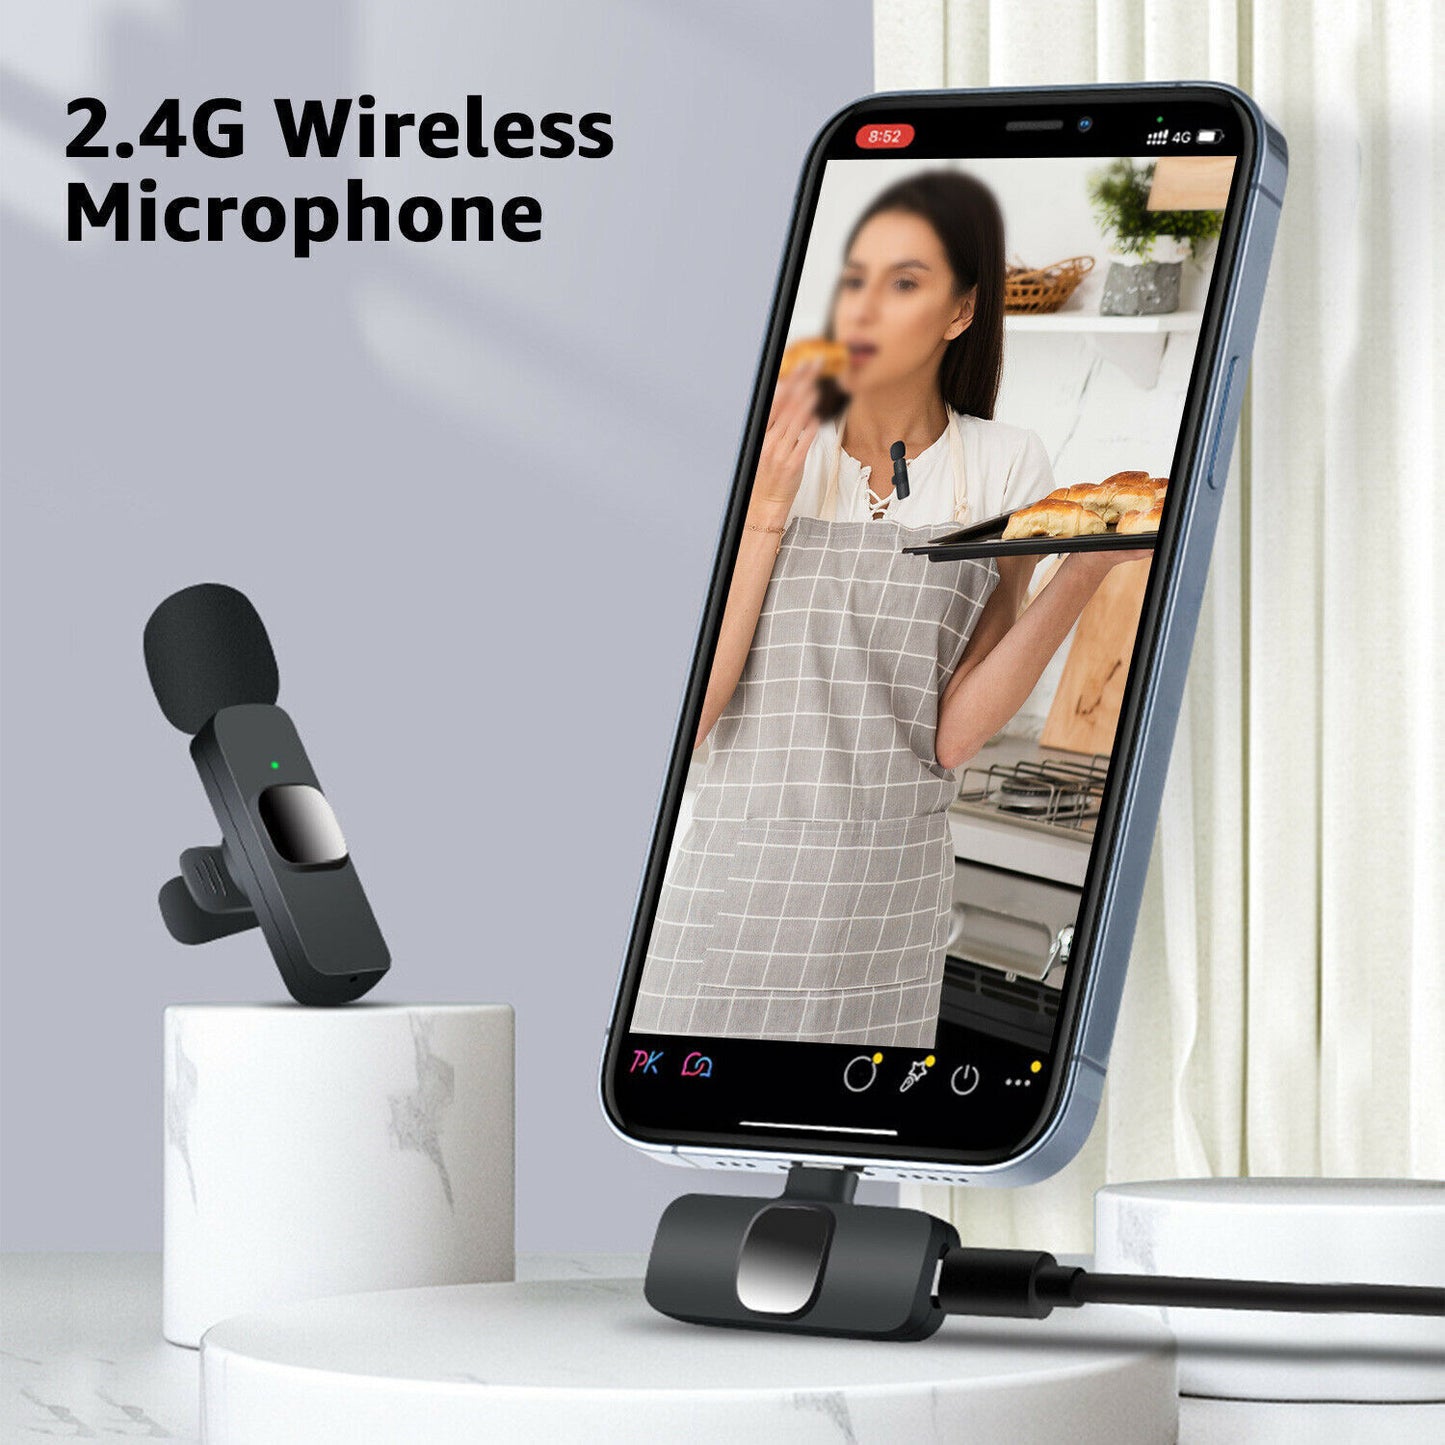 Lavalier Mini Microphone Wireless Audio Video Recording With Phone Charging Gadgets